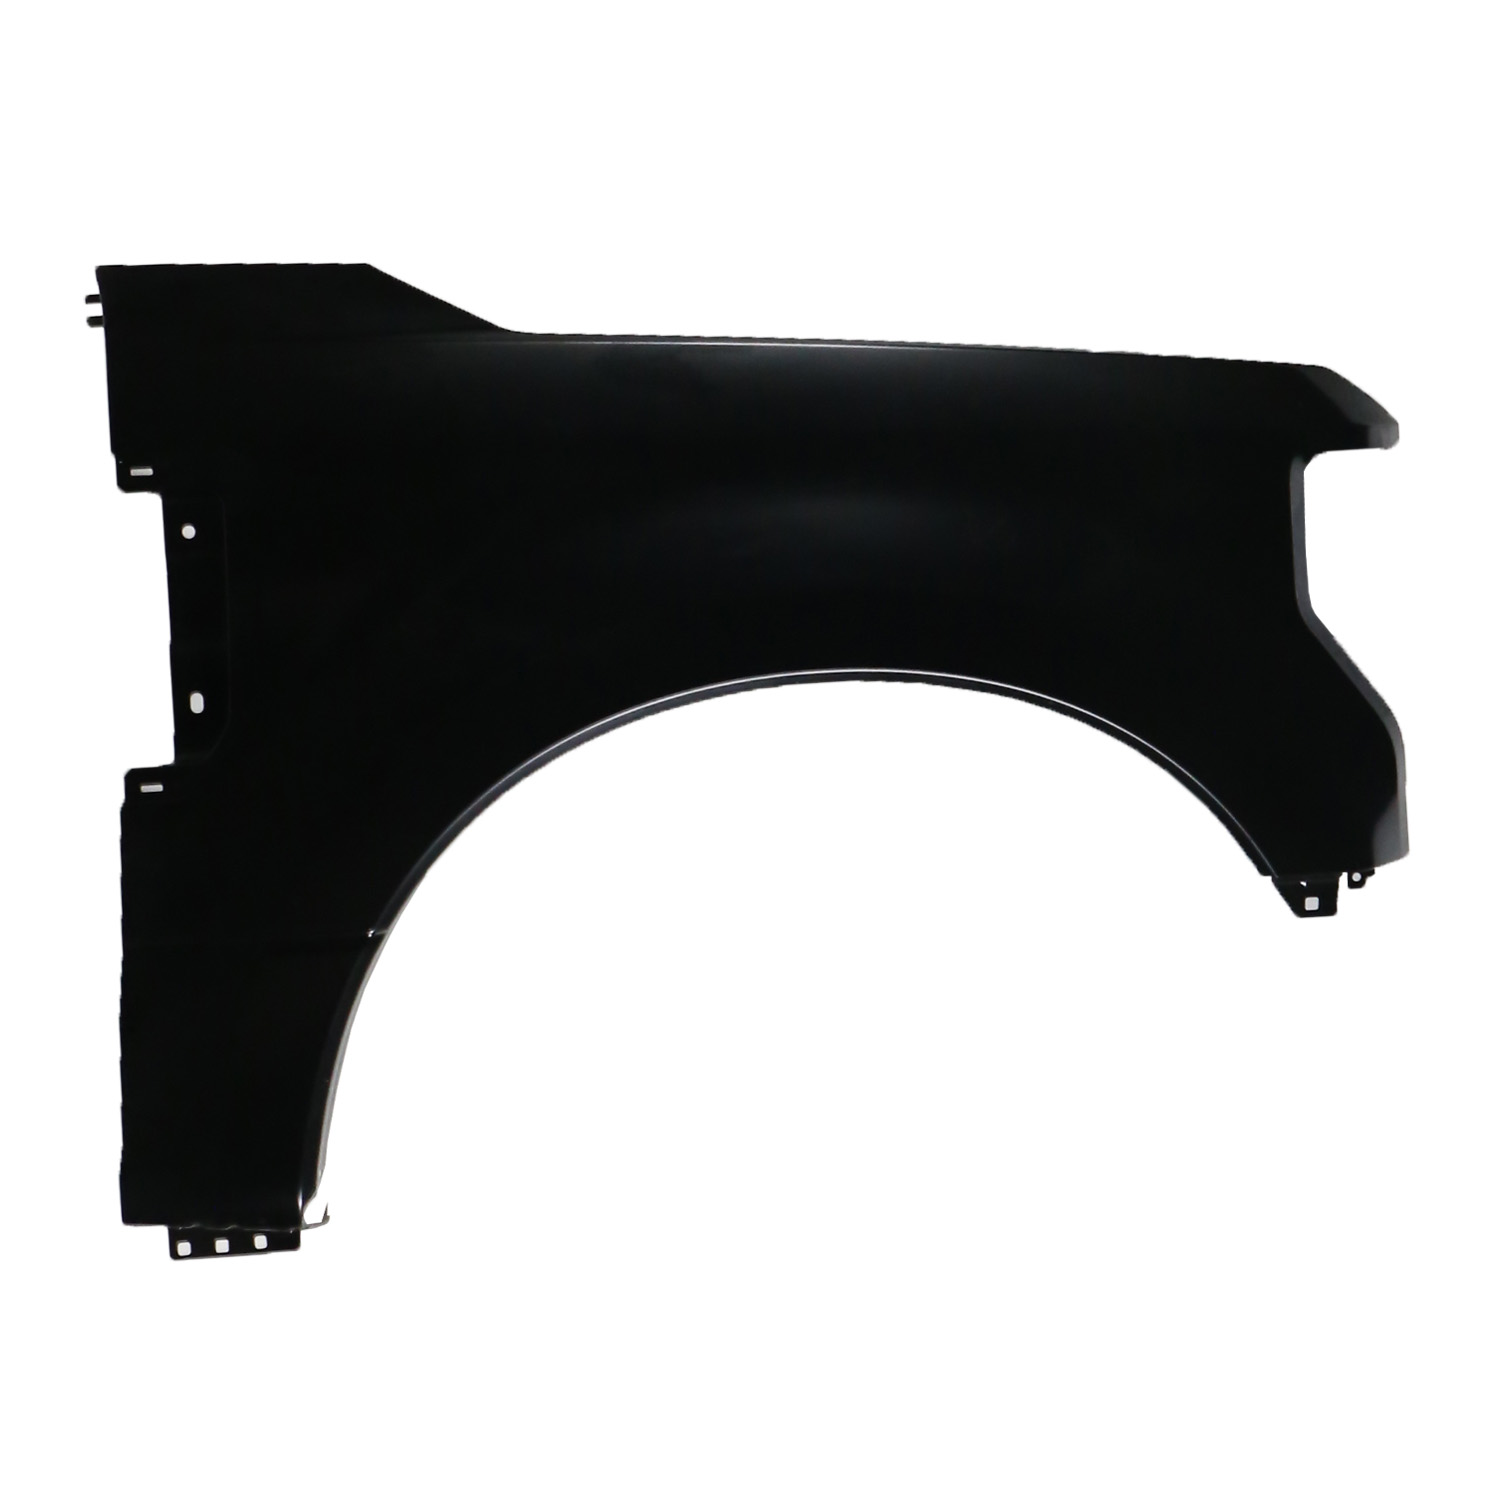 Aftermarket FENDERS for FORD - F-250 SUPER DUTY, F-250 SUPER DUTY,17-19,RT Front fender assy